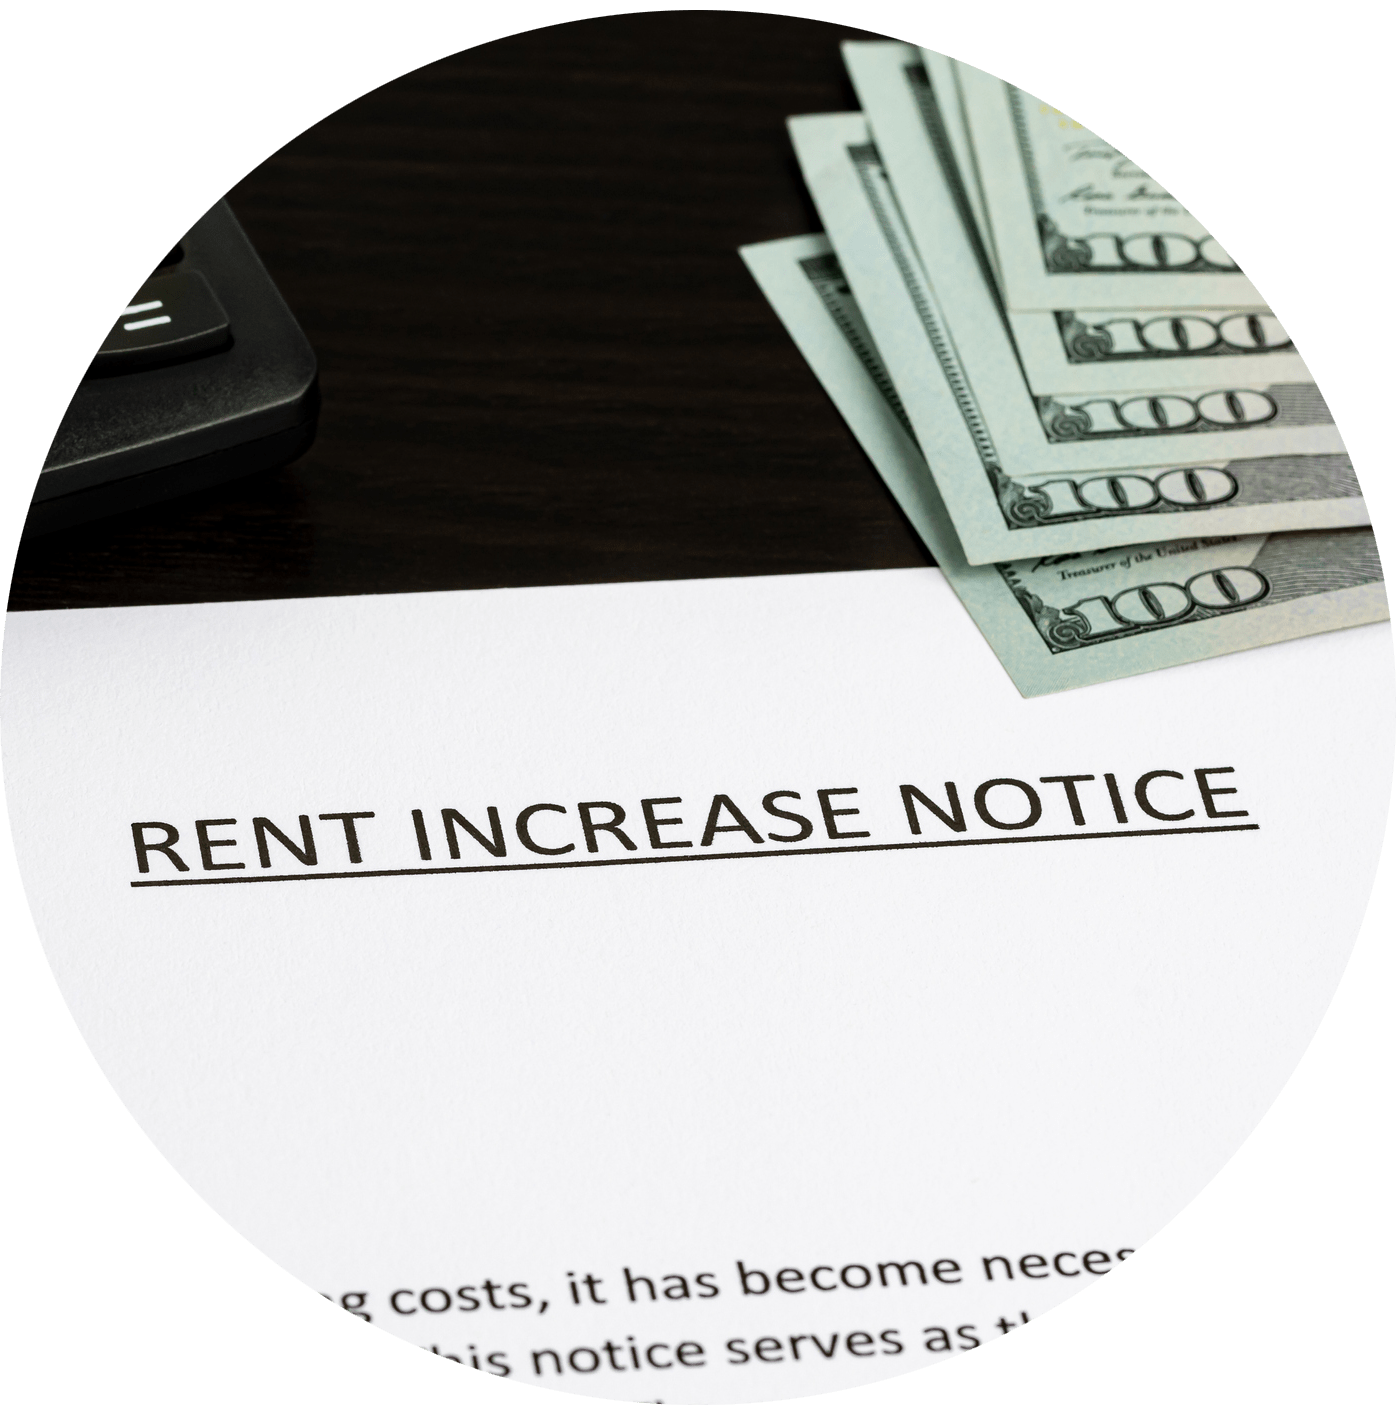 Cash sitting on top of a piece of paper with the title "Rent Increase Notice".